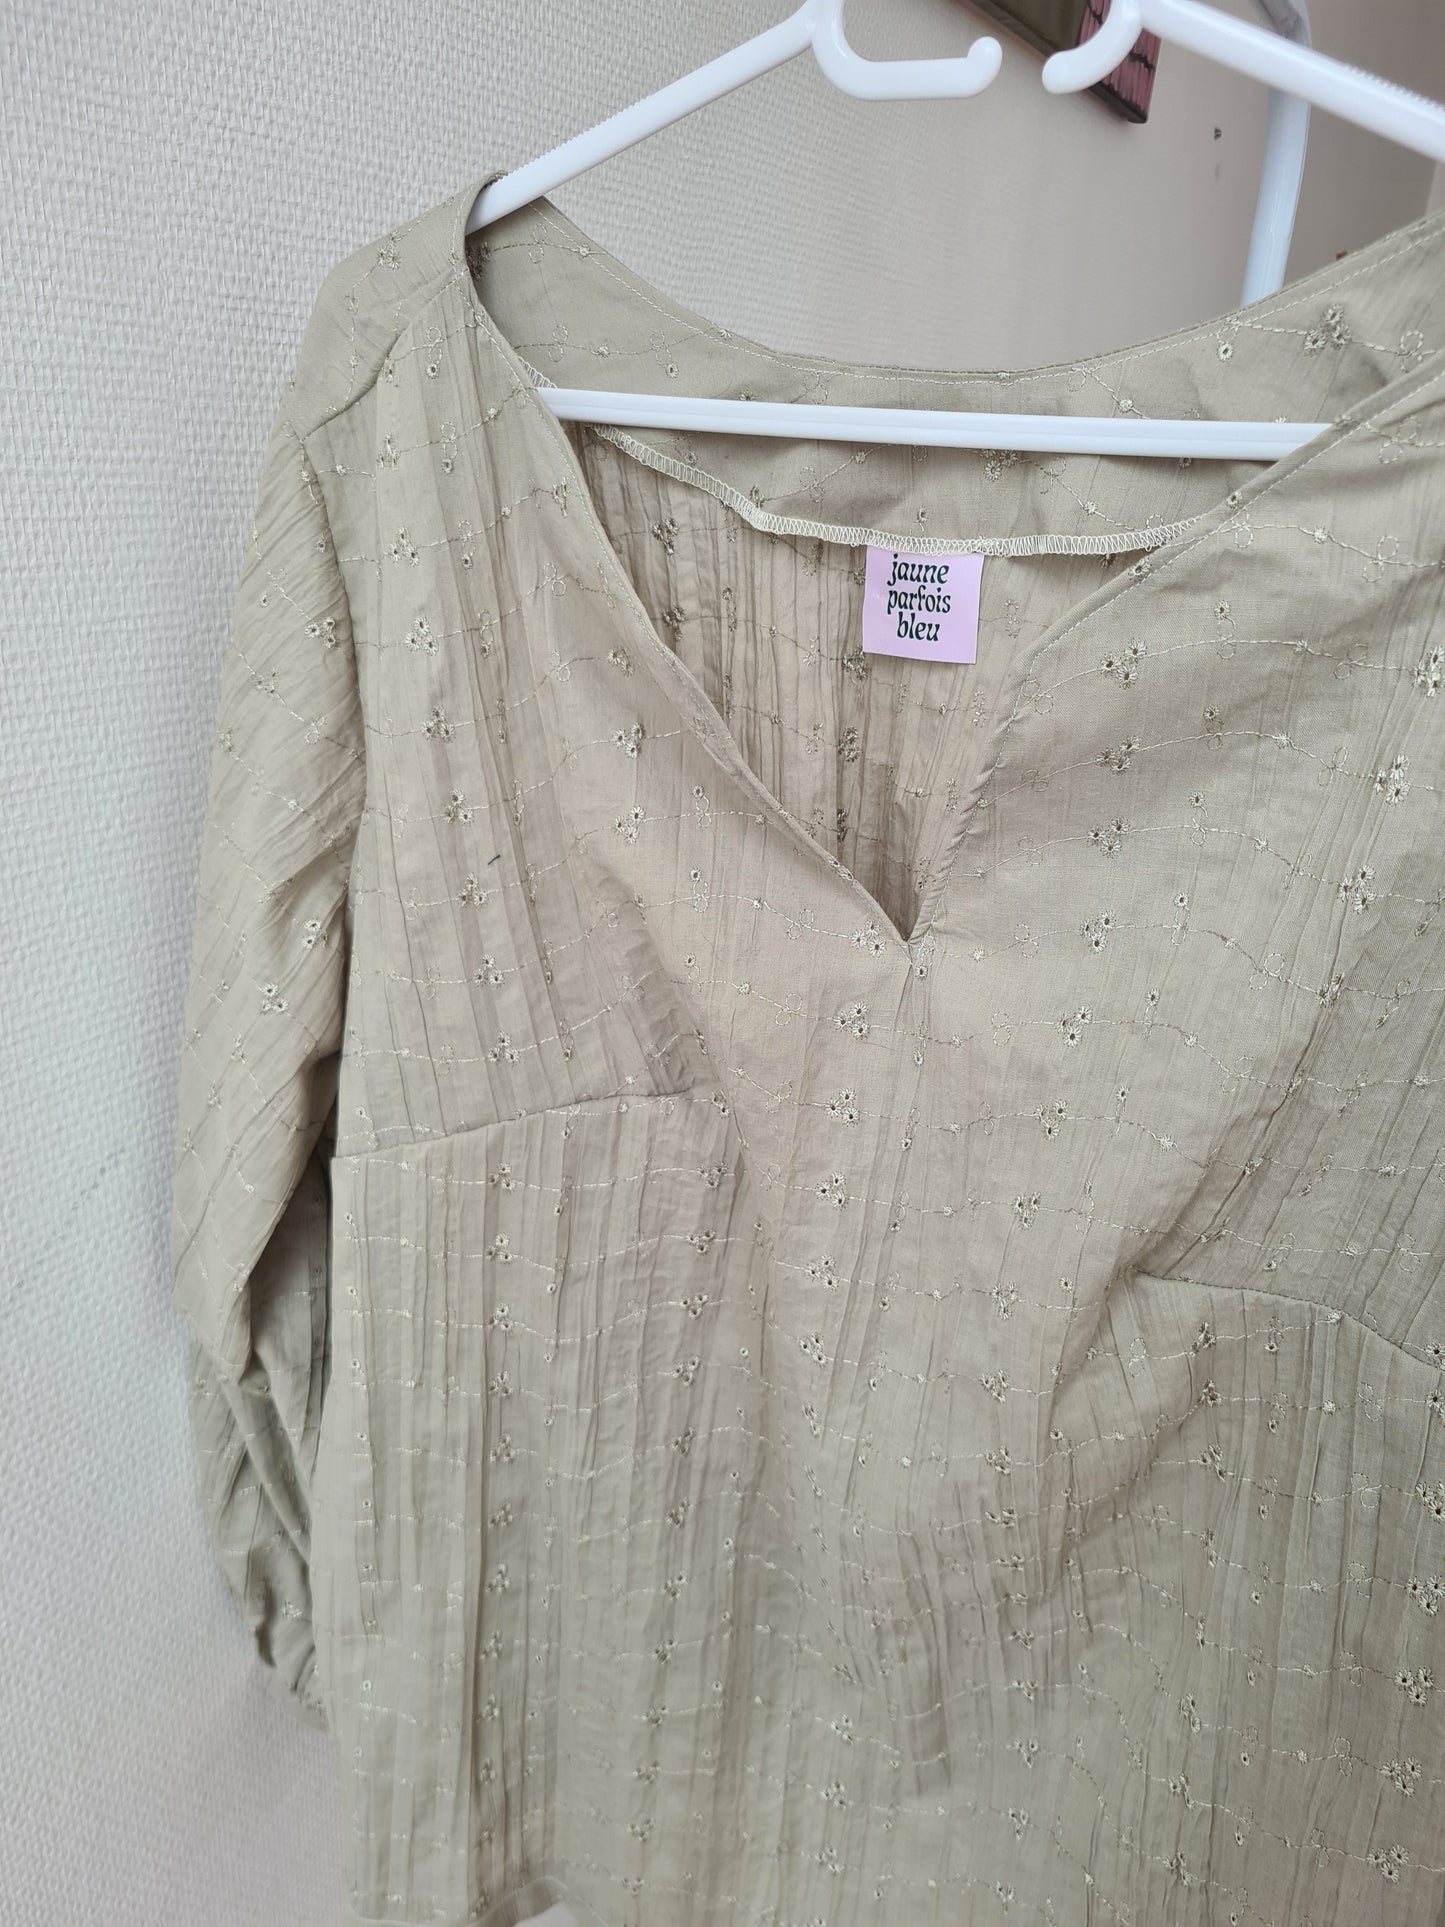 Blouse manches 3/4 broderie anglaise vert tilleul